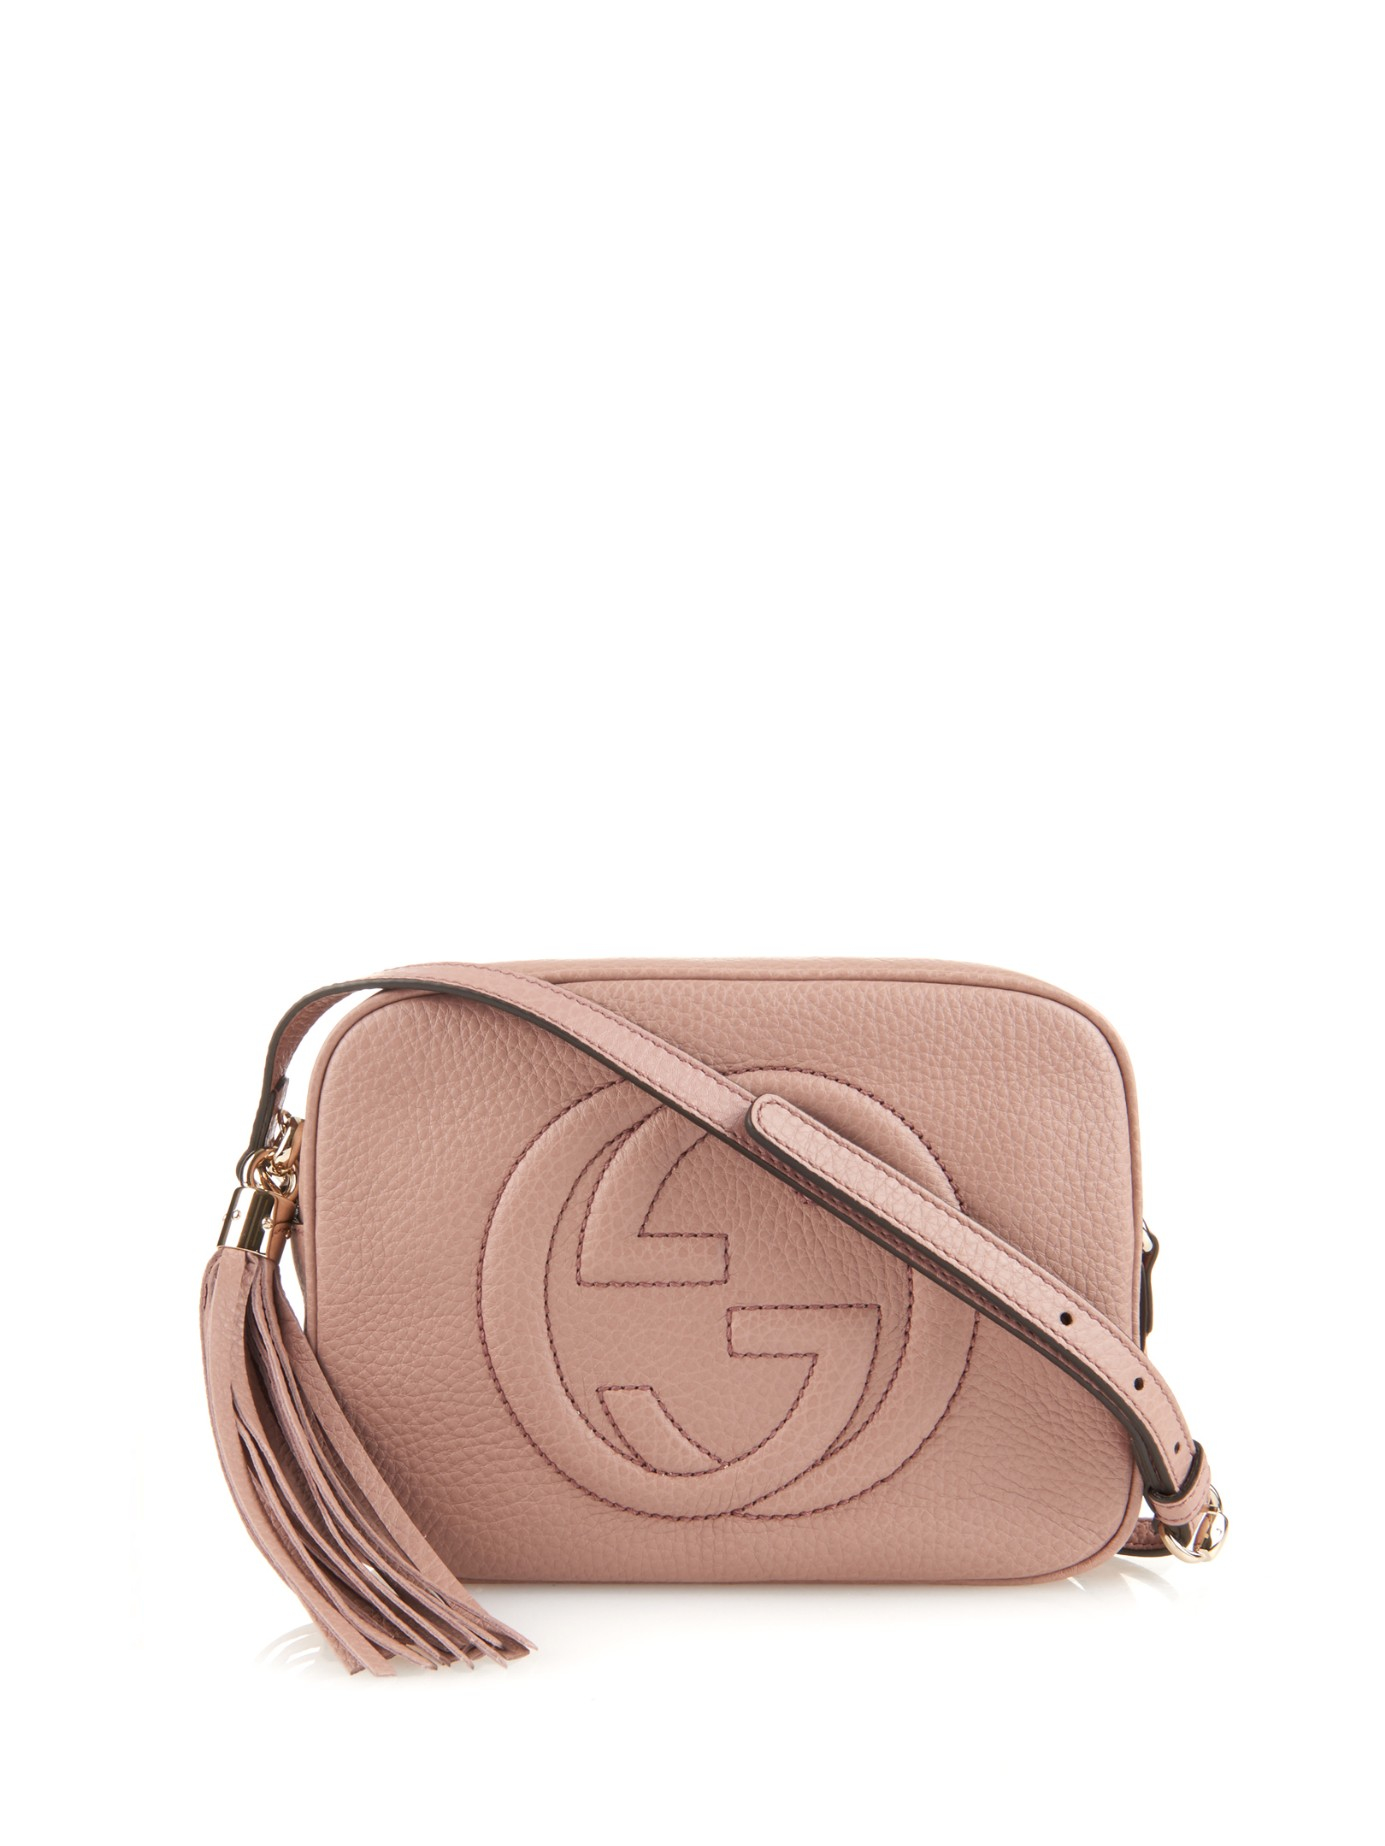 Lyst - Gucci Soho Leather Cross-Body Bag in Pink